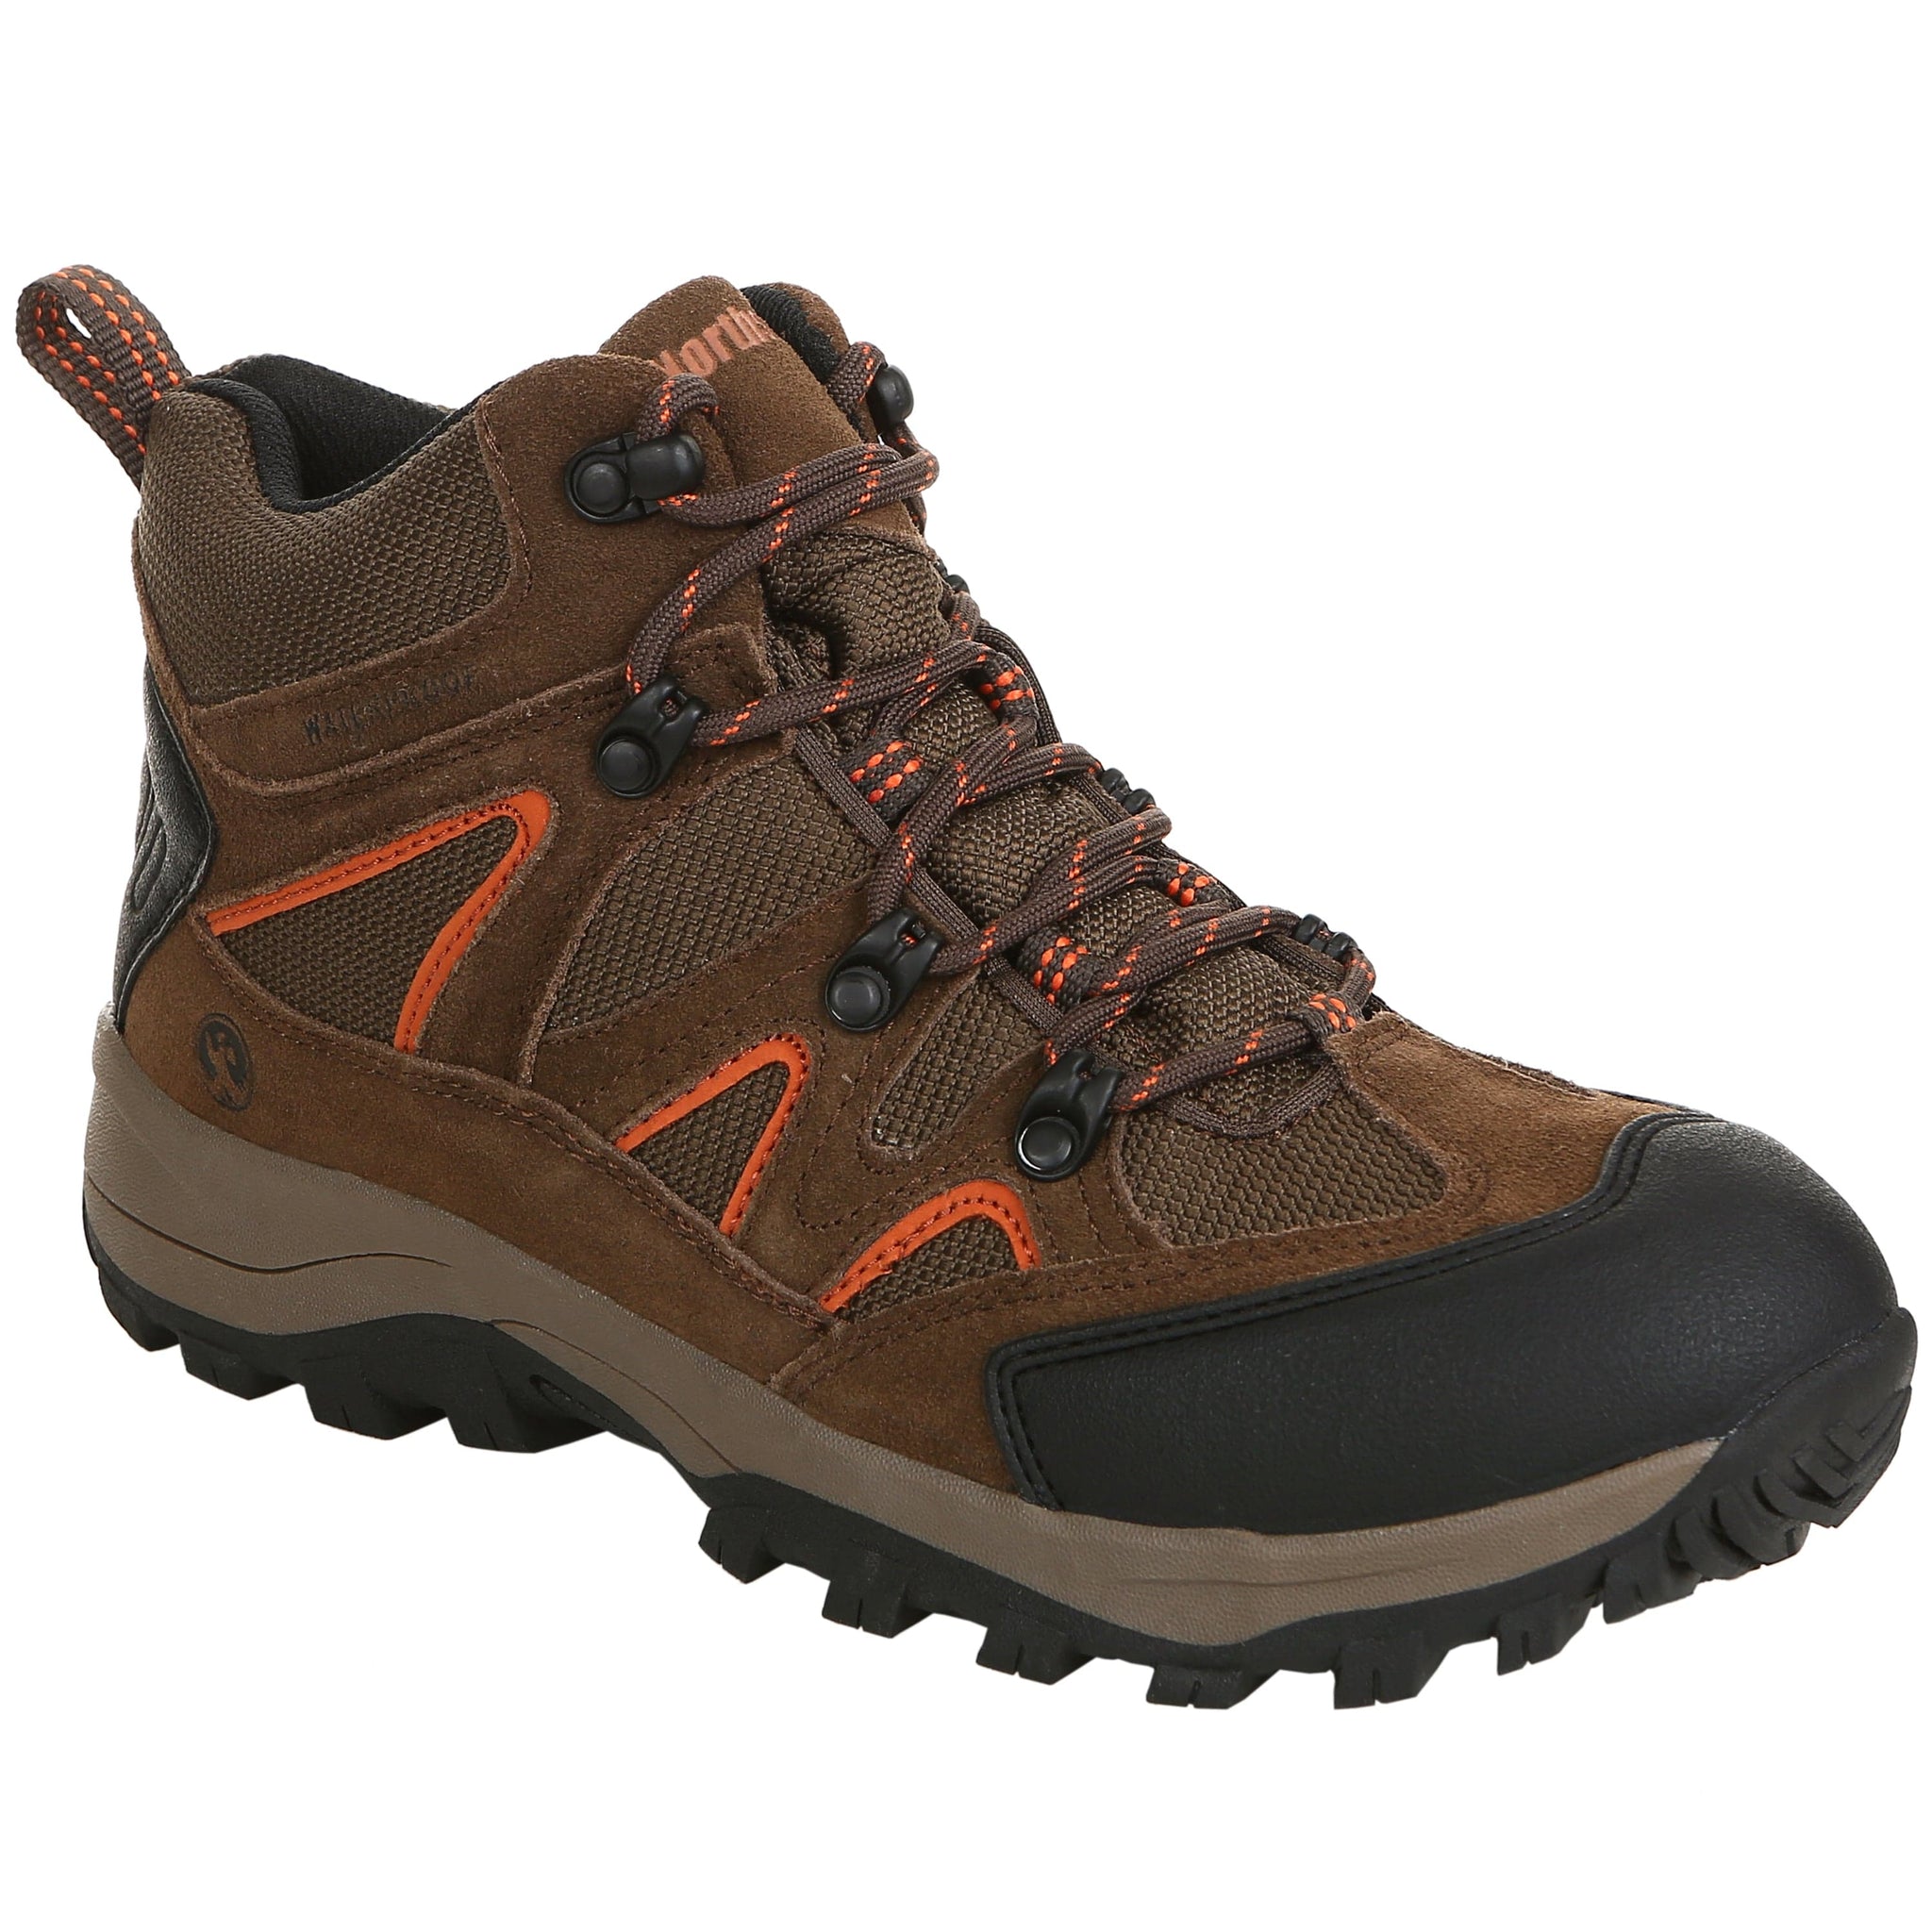 MEC - Ultralight waterproof-breathable hikers that are seamless